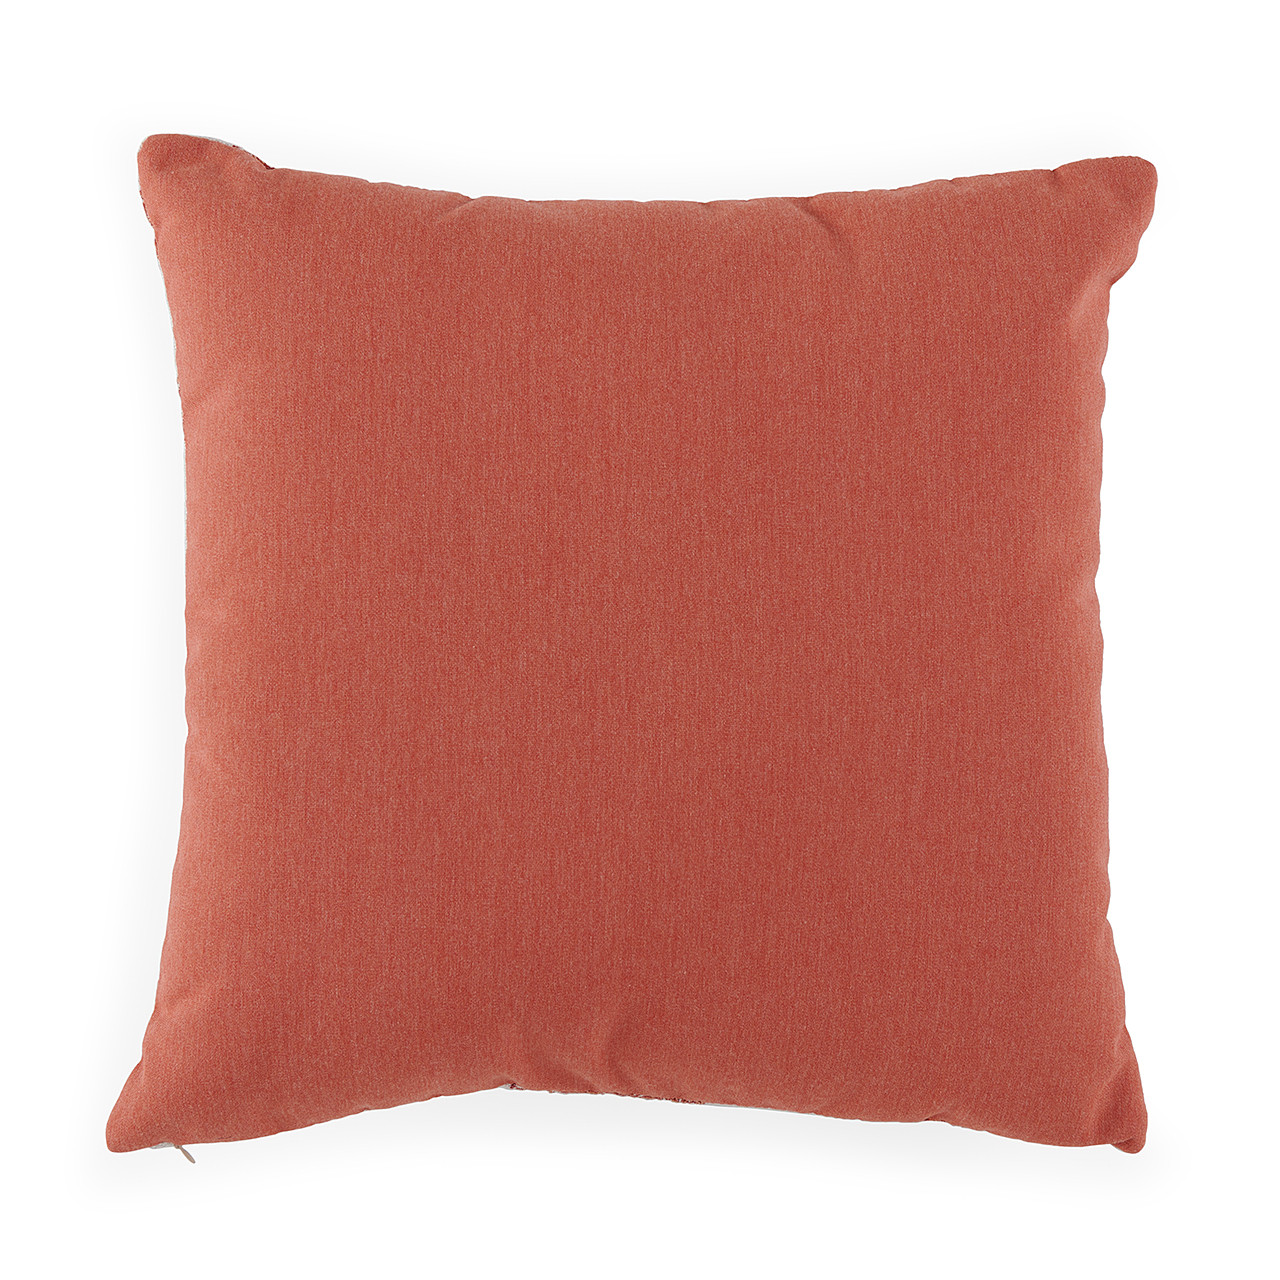 Canvas Persimmon and Royal Pointe Pomergranate 18 in. Sq. Throw Pillow